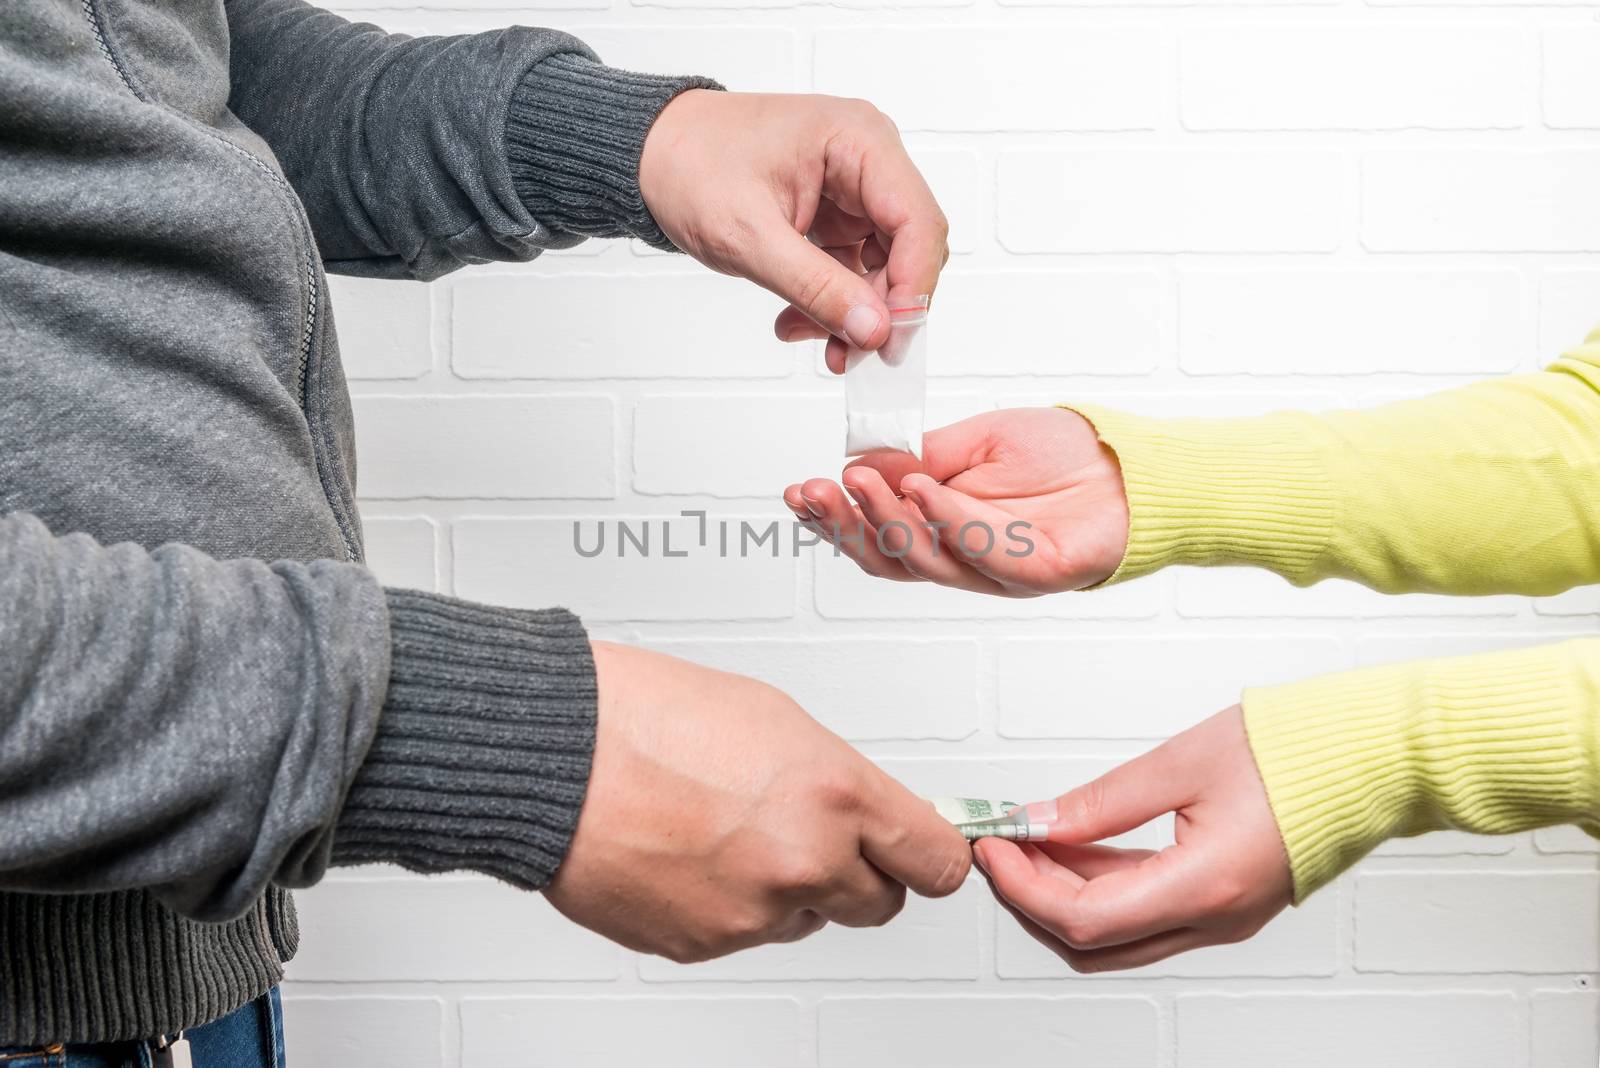 buying selling drugs hand close-up on a background of a brick white wall